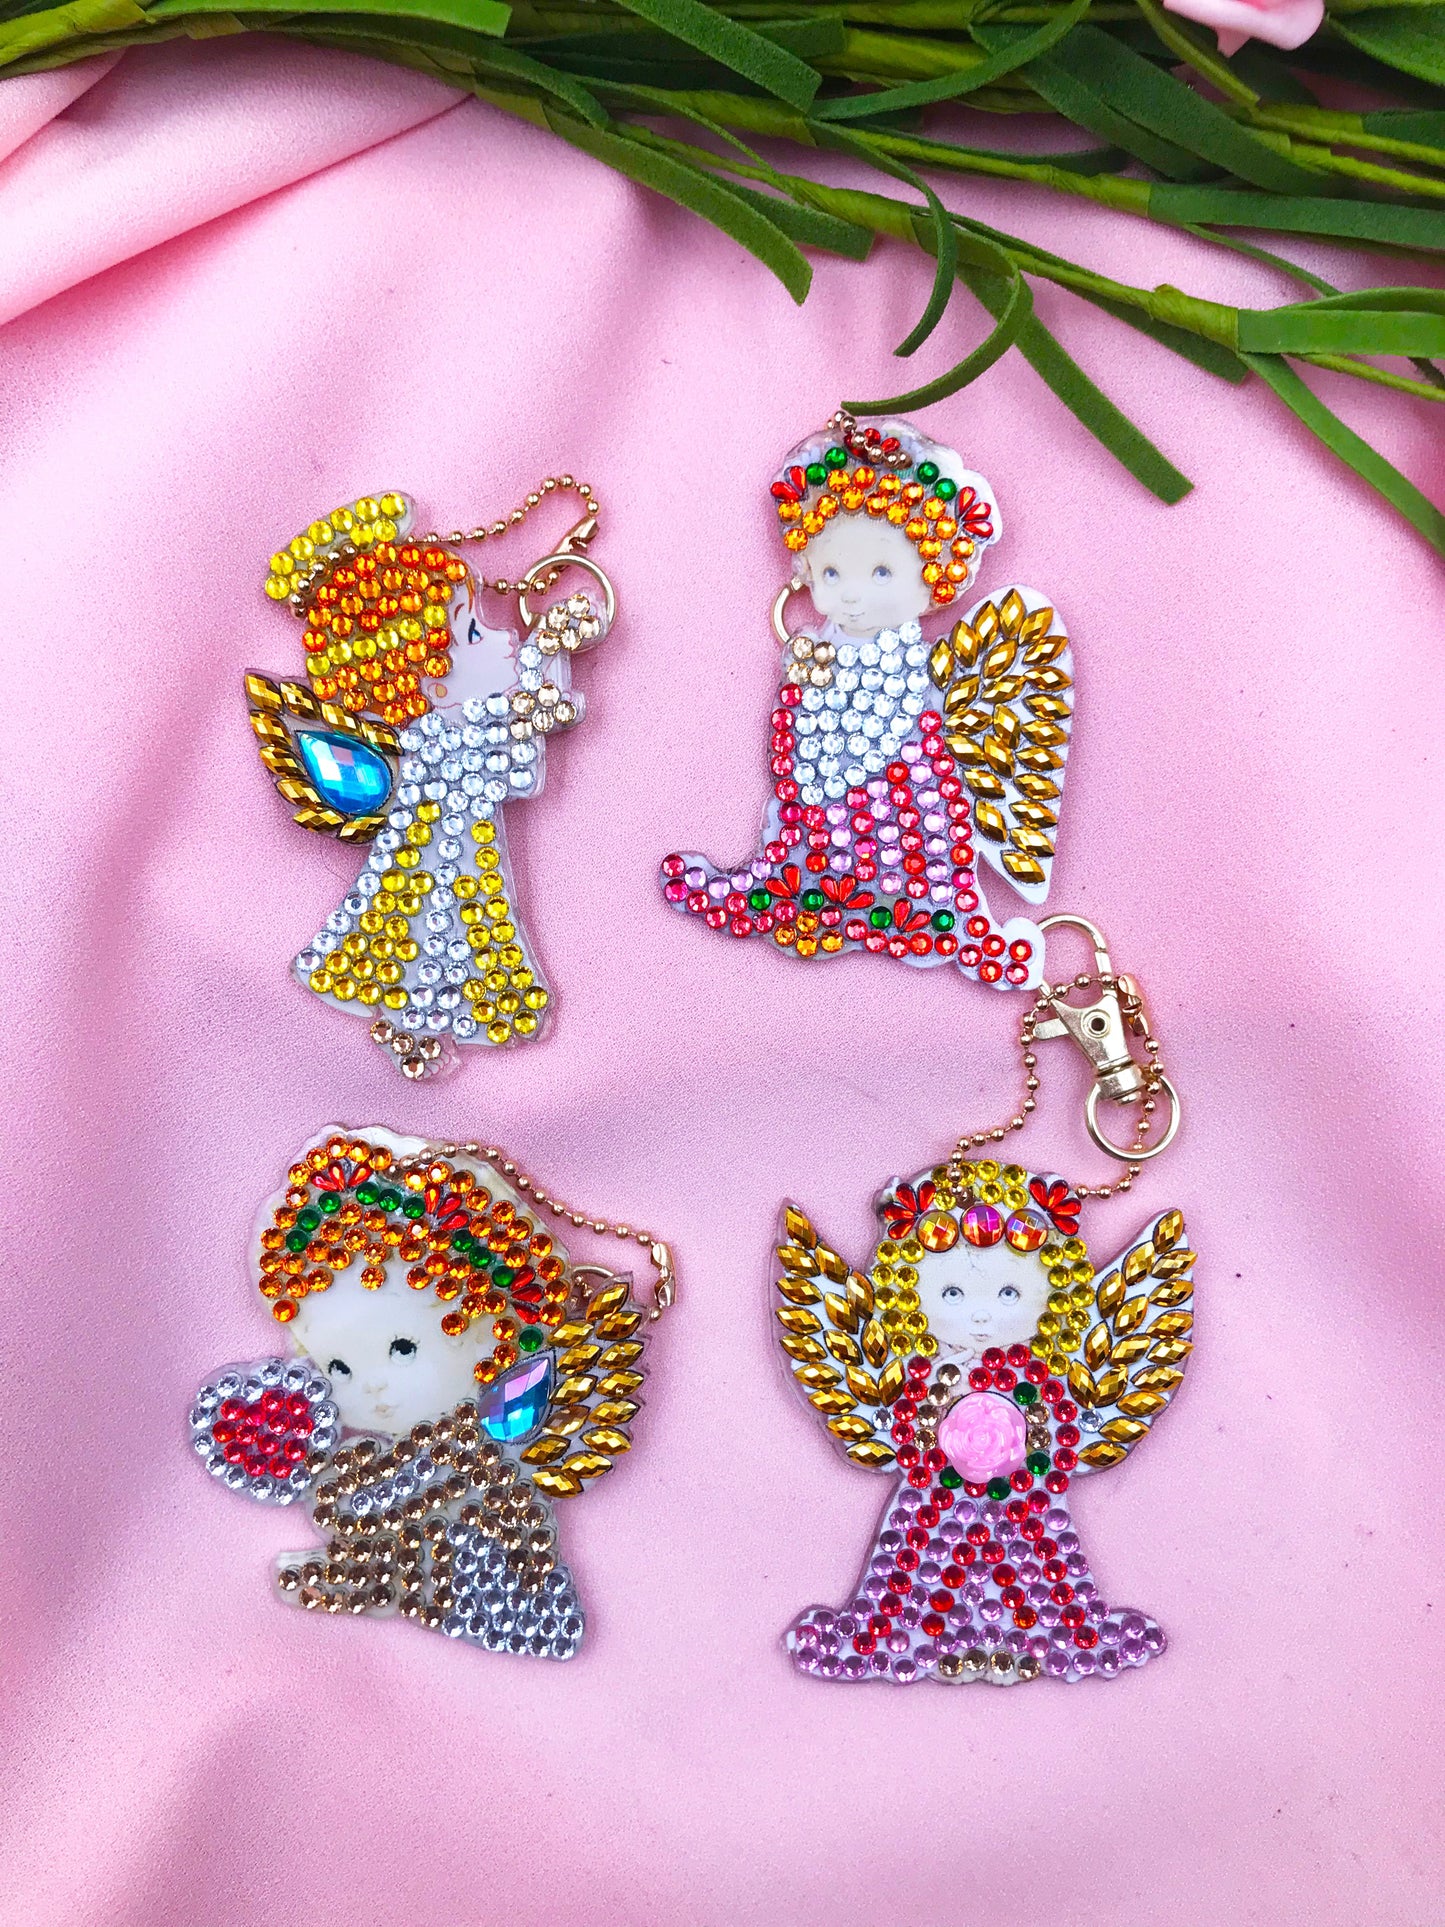 4pcs DIY Angel Sets Special Shaped Full Drill Diamond Painting Key Chain with Key Ring Jewelry Gifts for Girl Bags